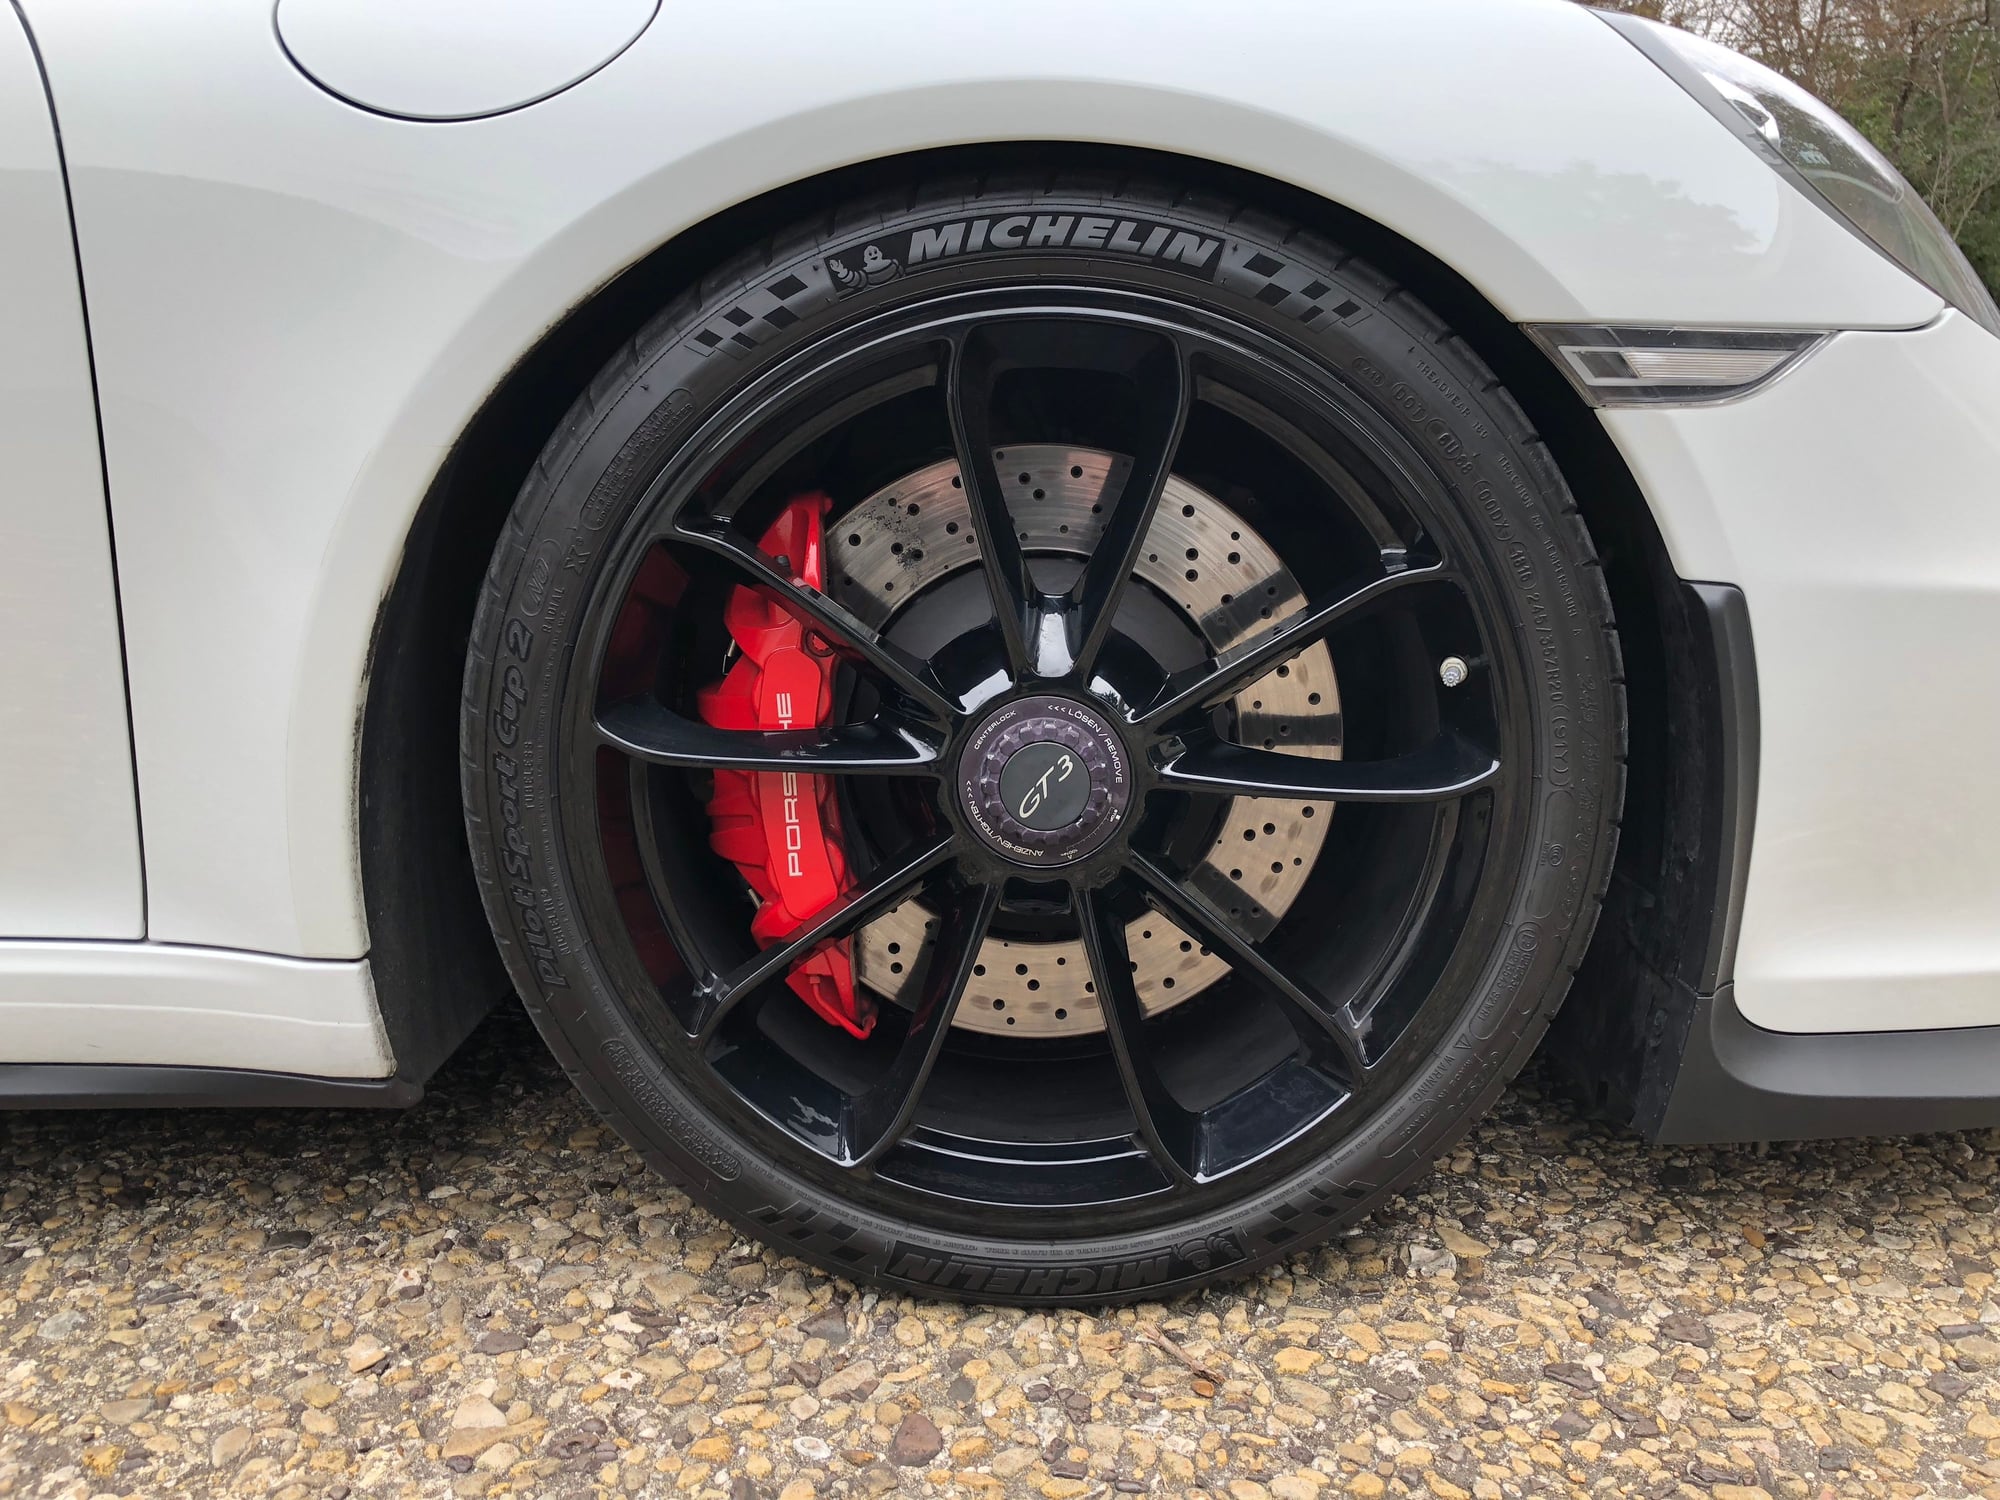 Wheels and Tires/Axles - 991 GT3 OEM Stock Wheels Wheelset- Black Gloss Set - Used - 2014 to 2019 Porsche GT3 - Dallas, TX 75229, United States